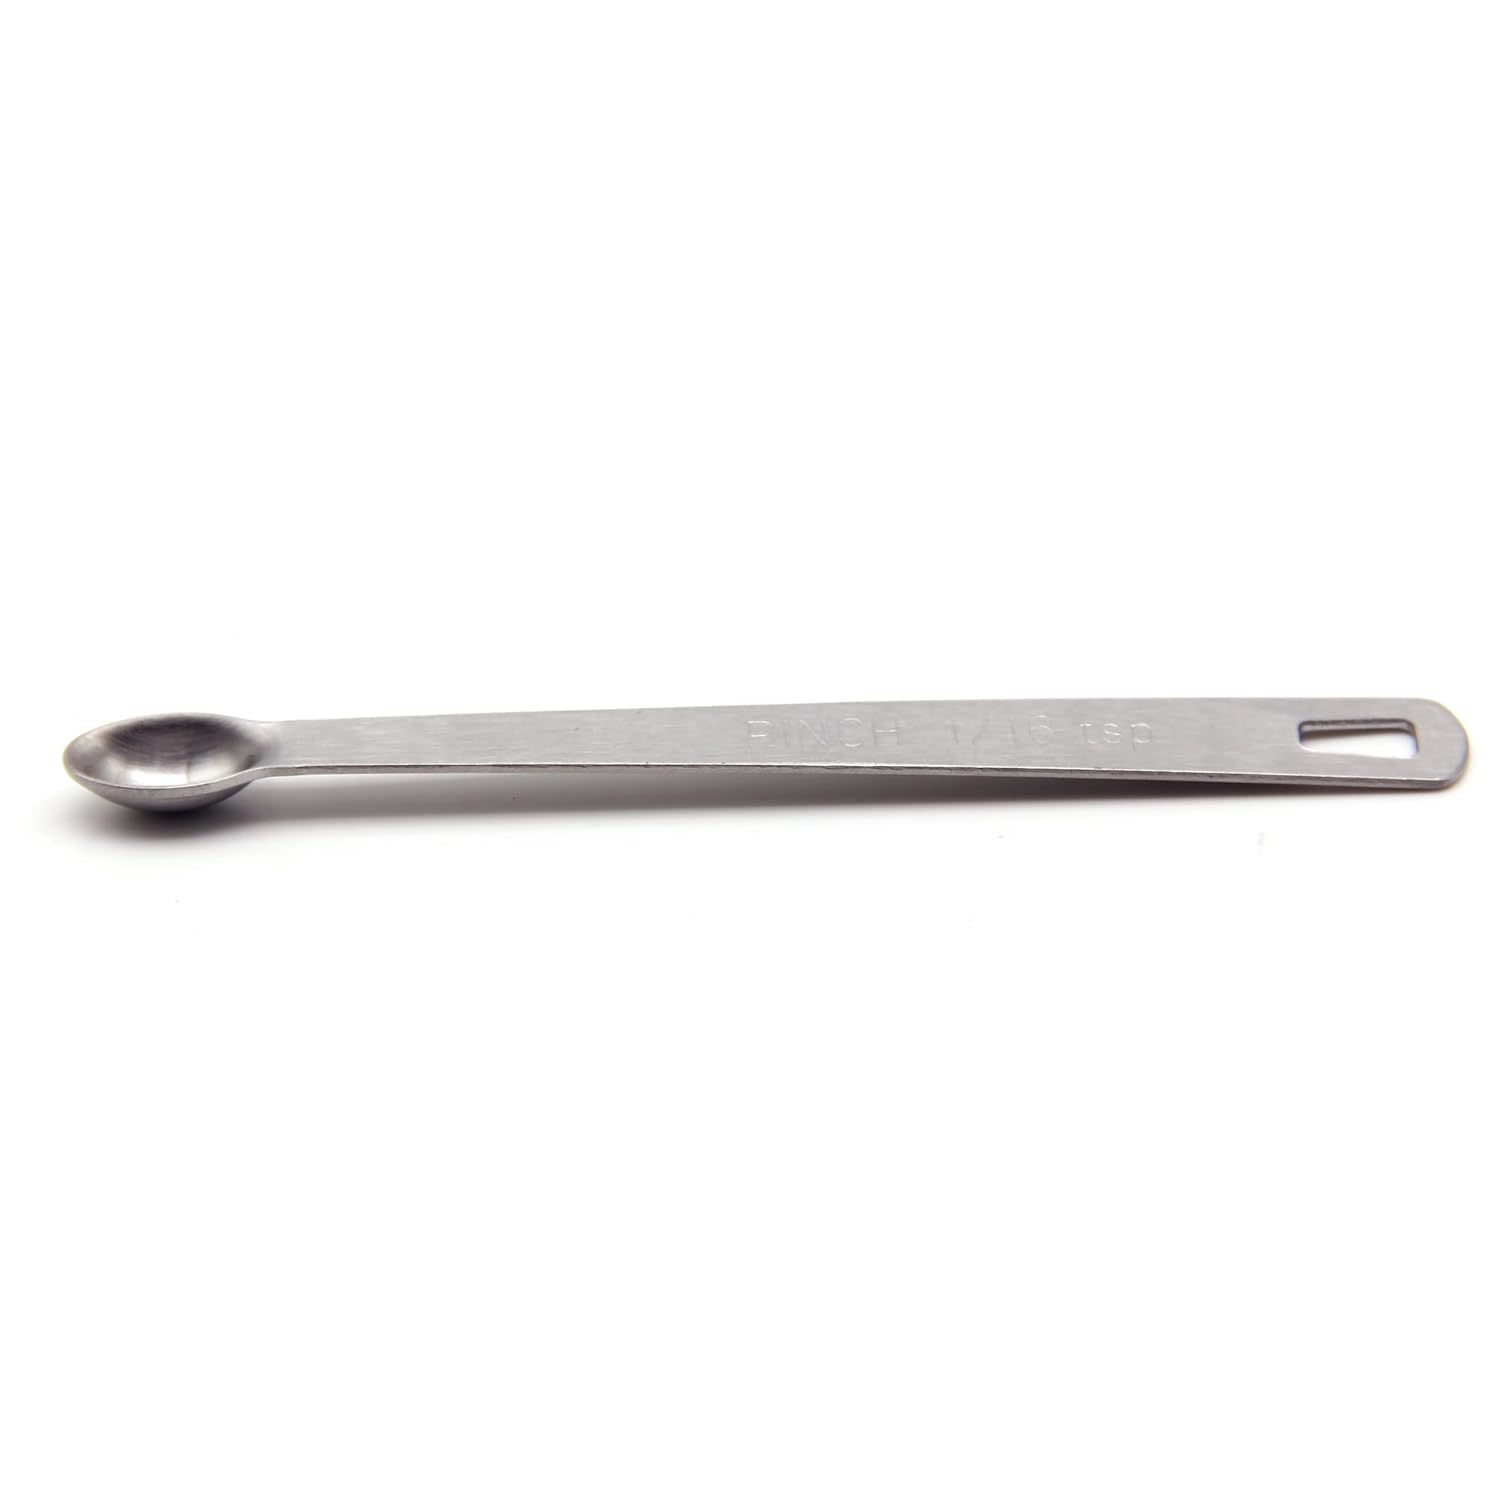 Extra Small Cookie Scoop 1 tsp, Professional Stainless Steel Mini